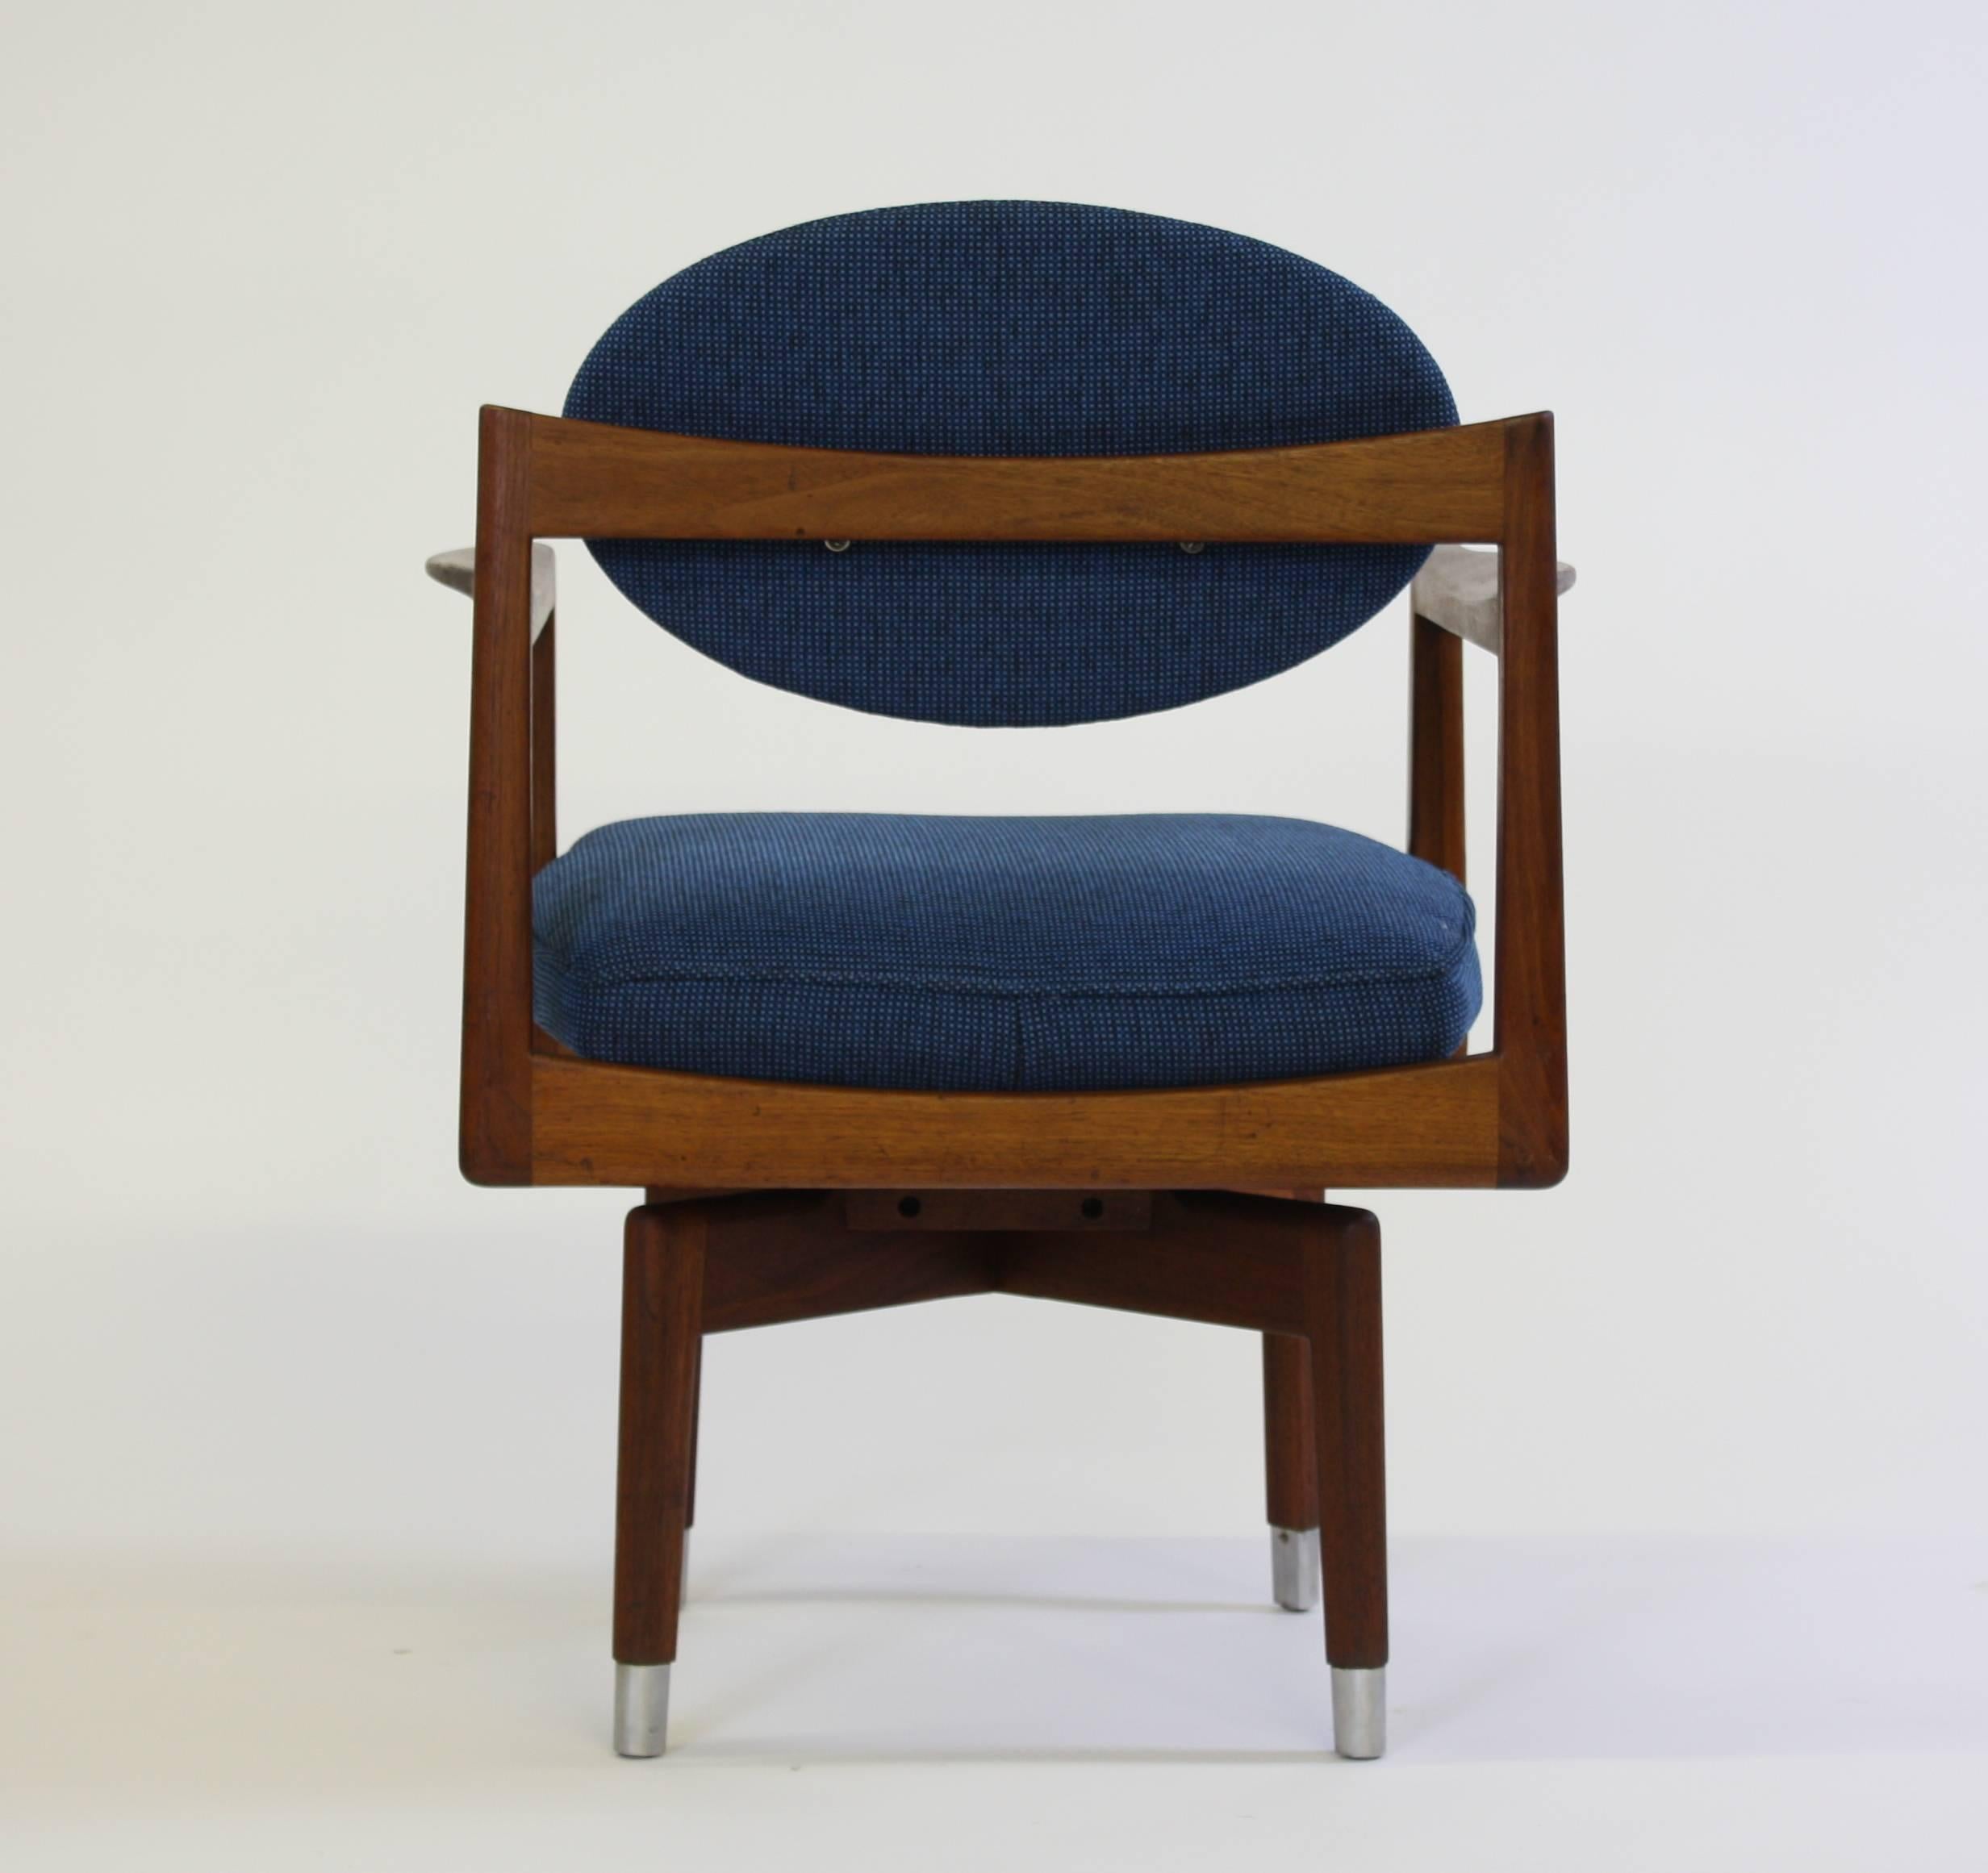 Wonderful Jens Risom office chair with swivel on rare four point base. Reupholstered in a vintage old stock fabric.